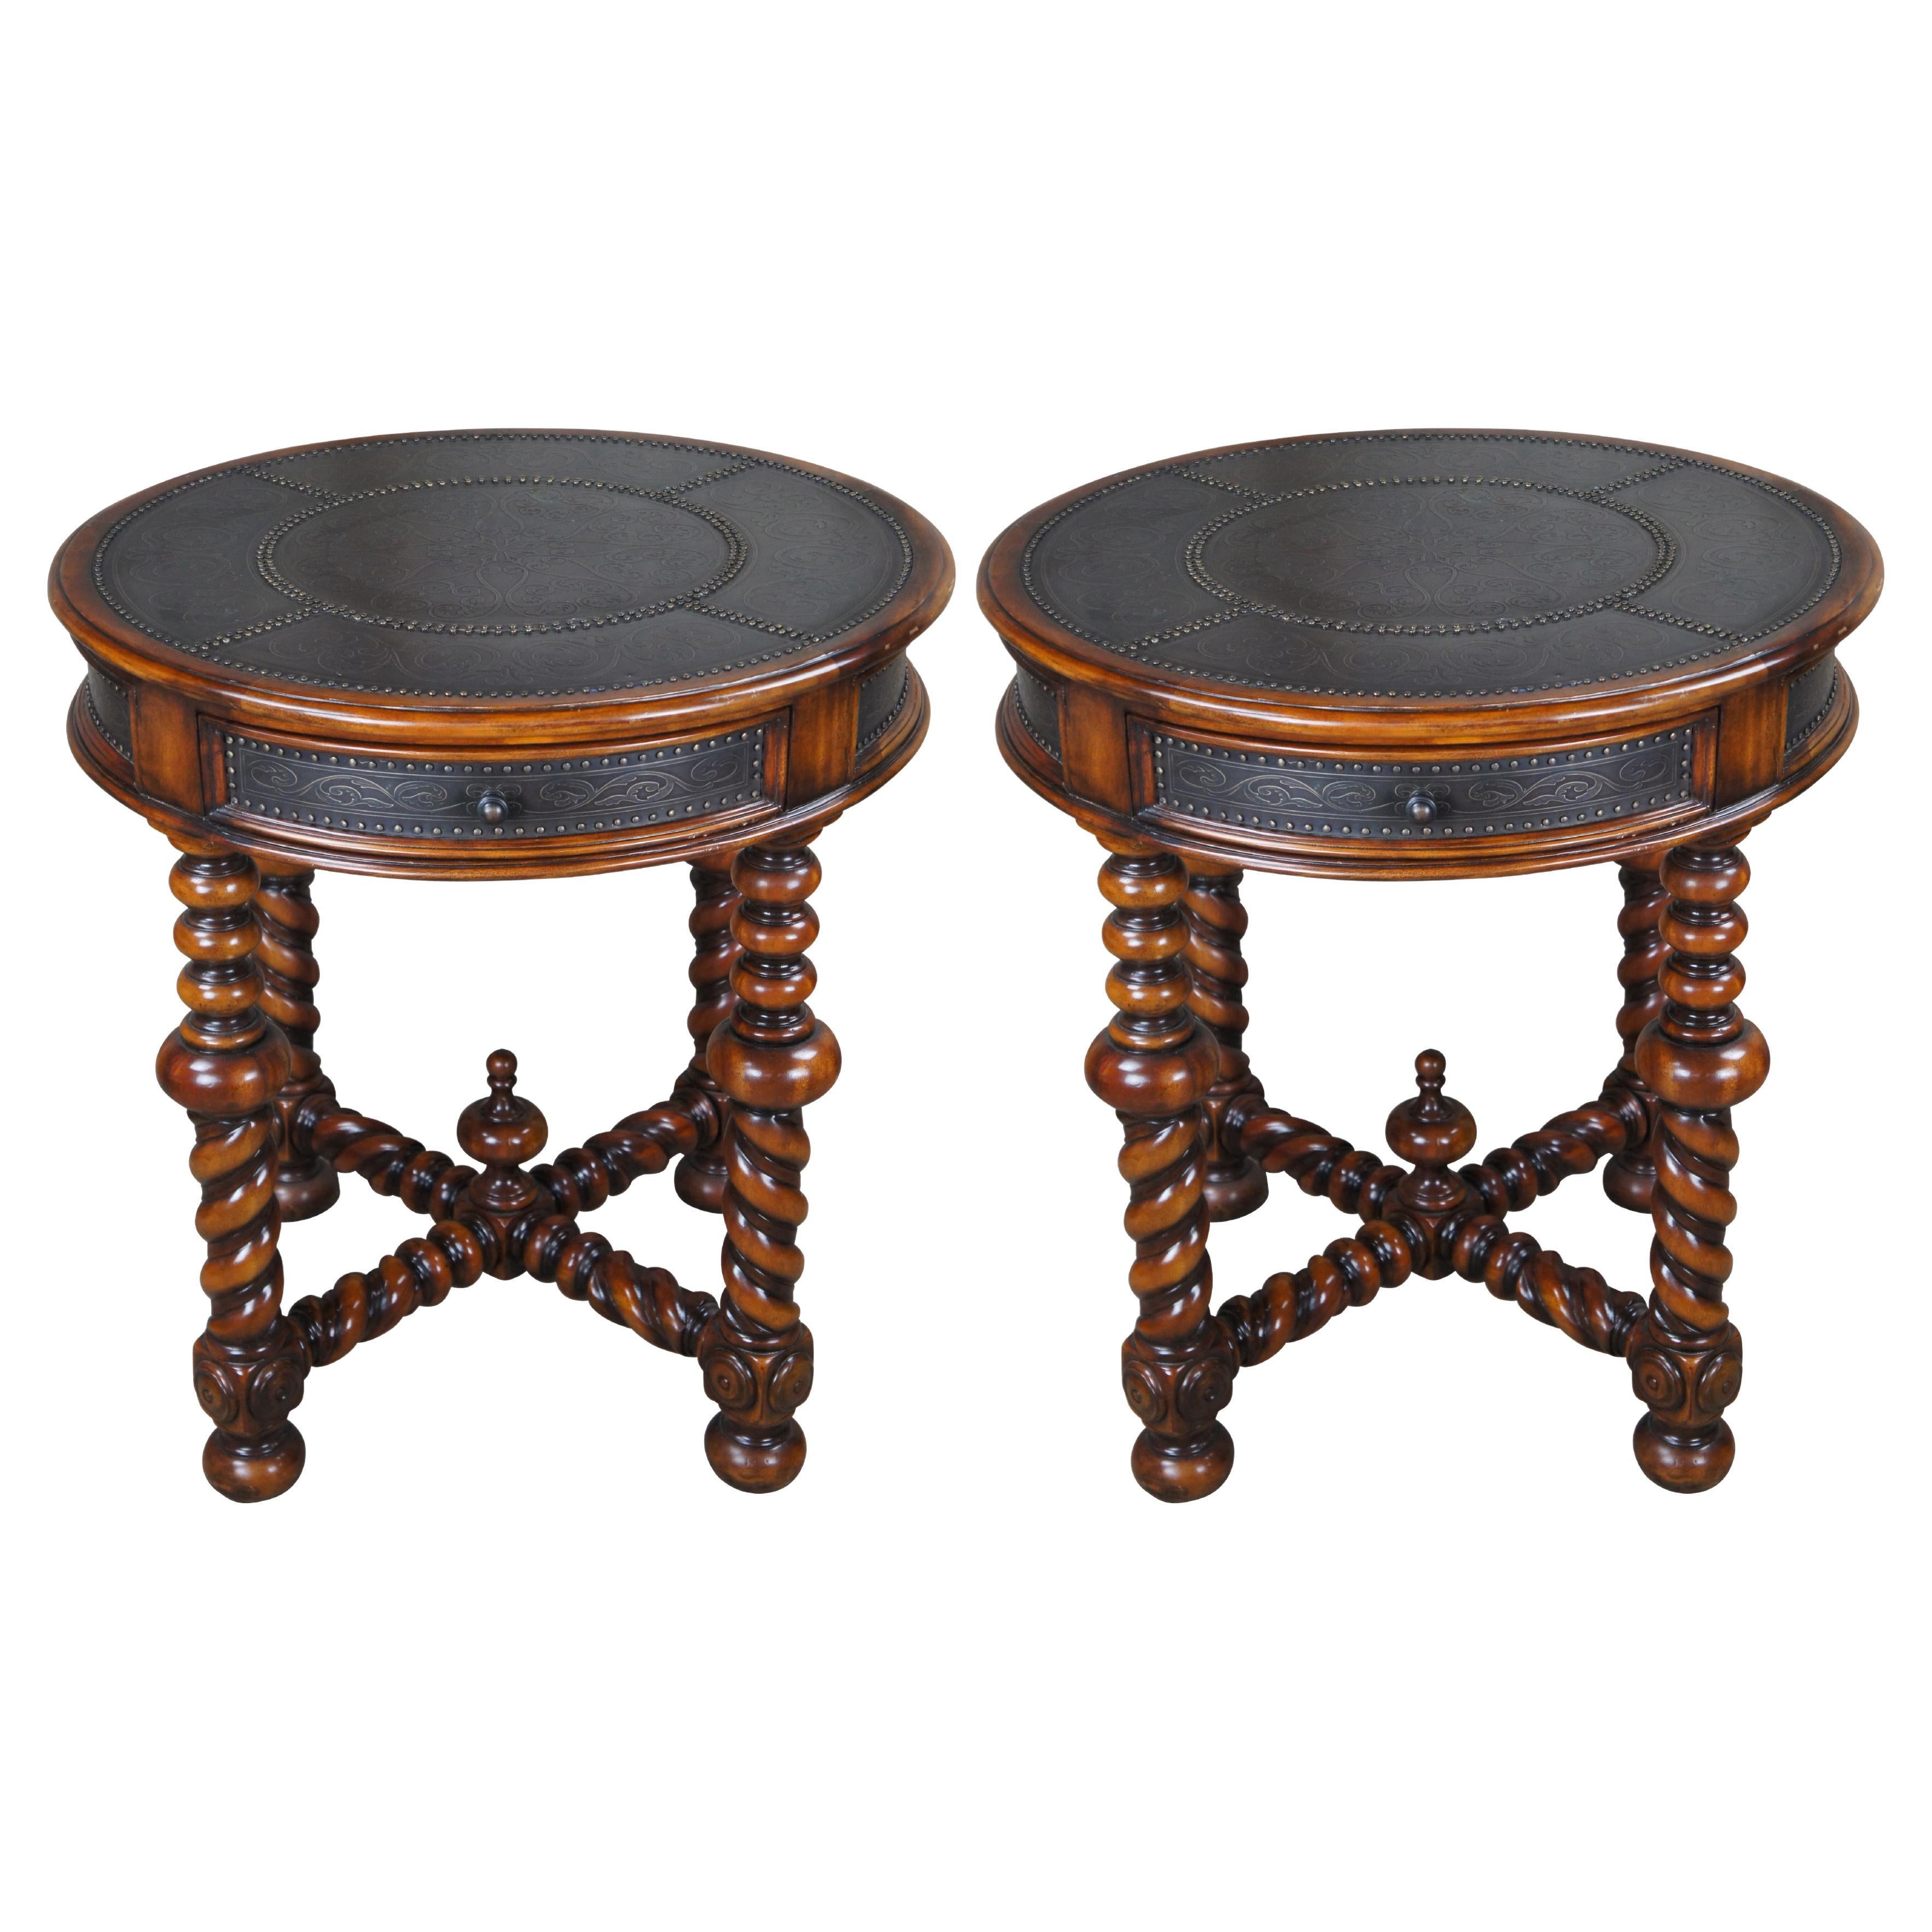 2 Theodore Alexander Amoury Libson Mahogany Engraved Brass Bedside End Tables For Sale